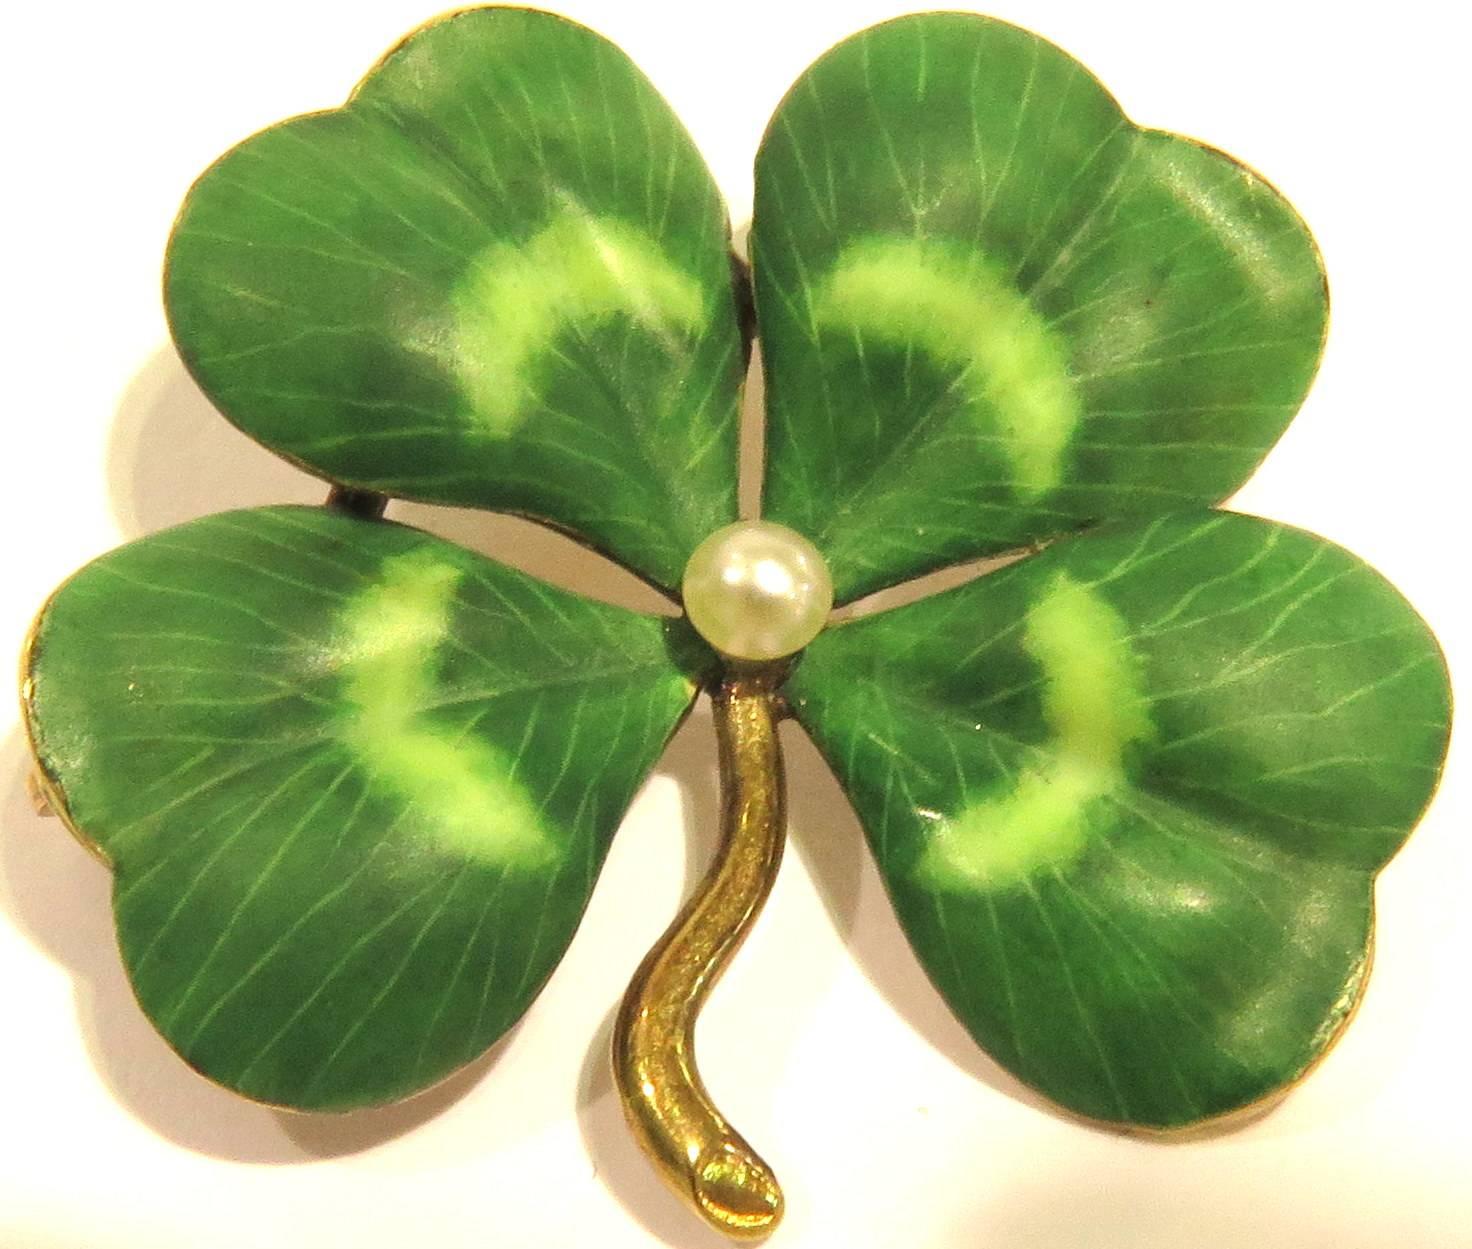 You can see each & every vein in this 4 leaf clover pin. In the center is a natural pearl. I don't know this signiture, but image #6 shows it clearly.
This pin weighs 5.4 grams
This pin measures 1 1/4 inch from most angles